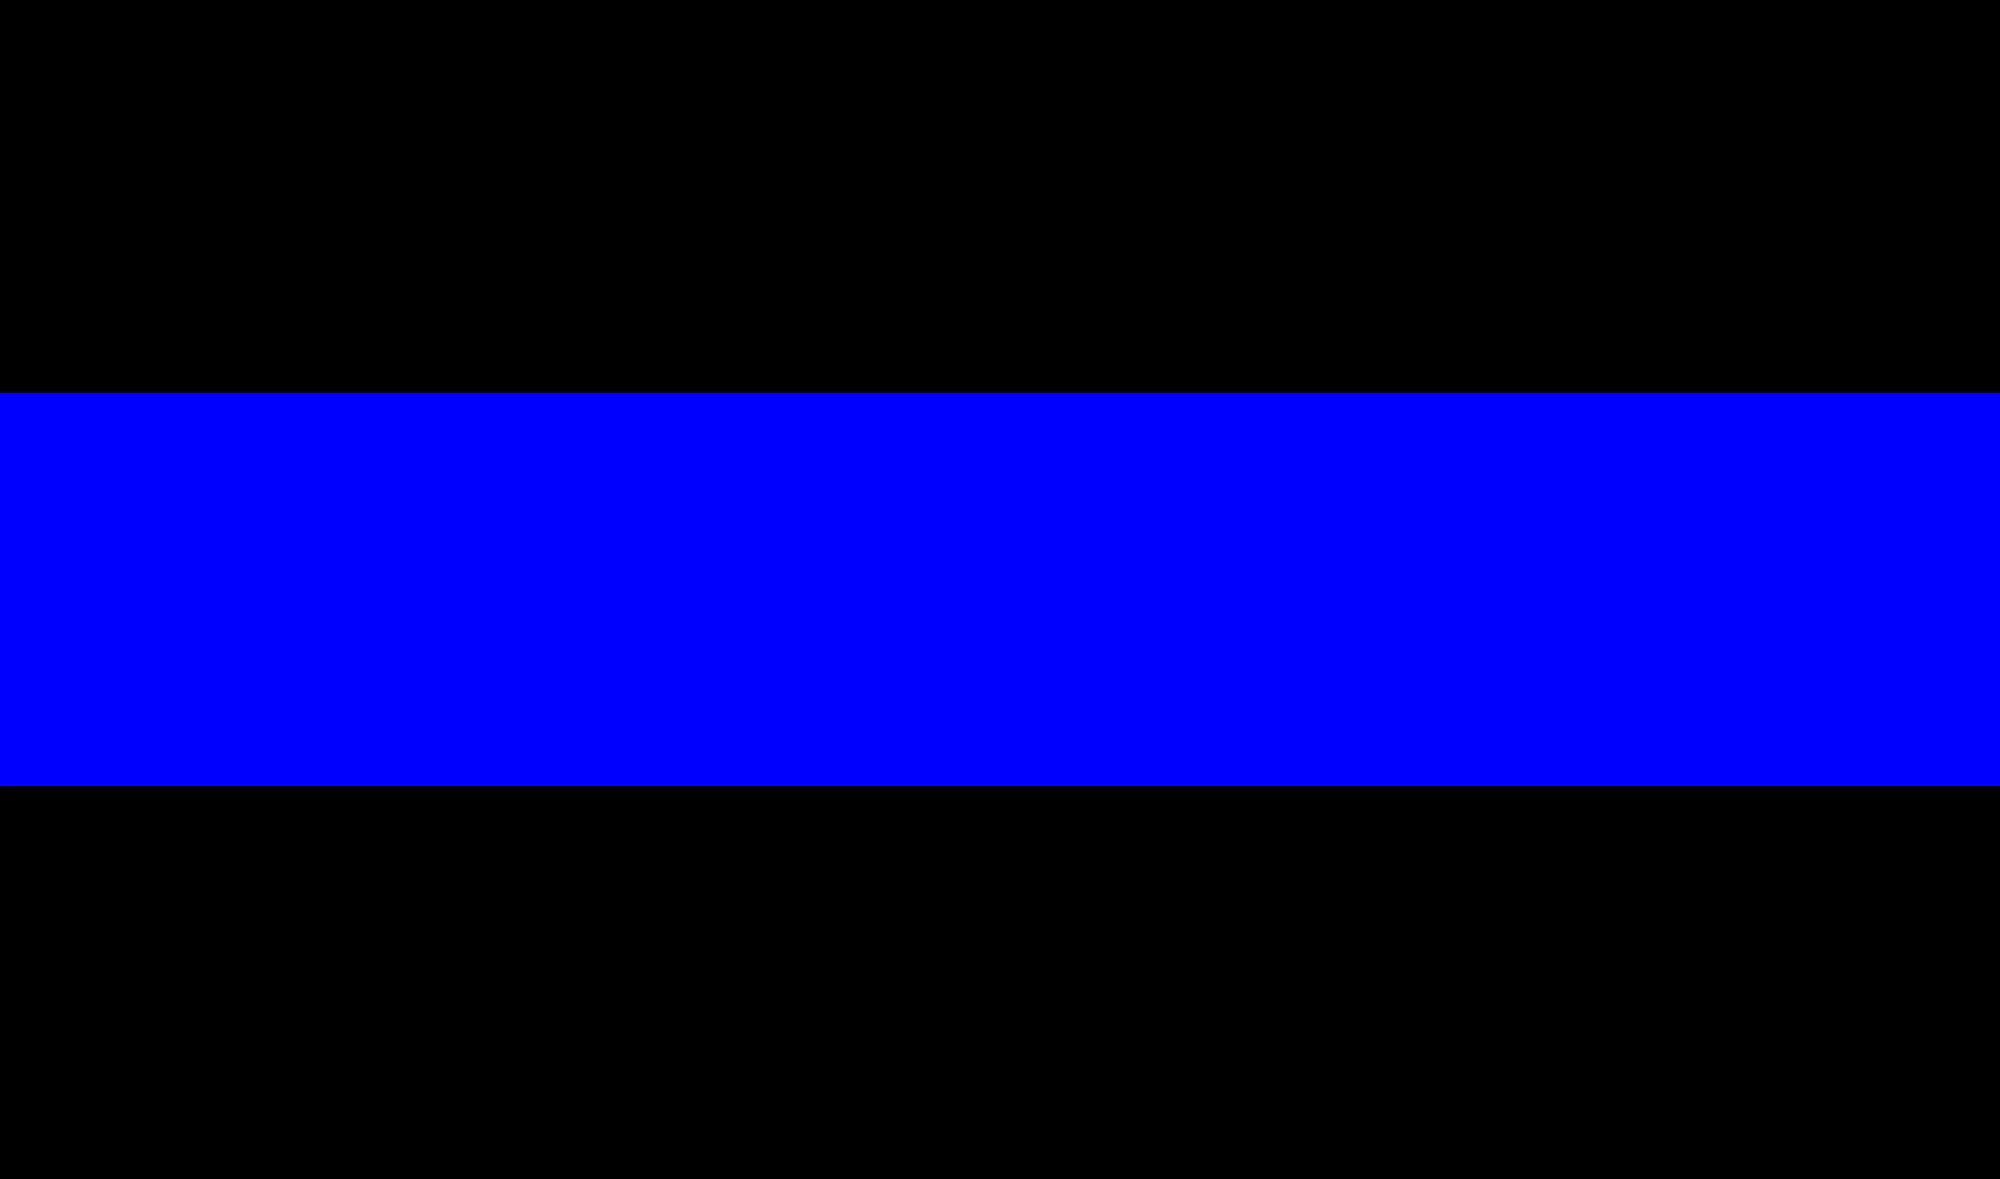 Current The Thin Blue Line, a Flag Used by Police Officers in North